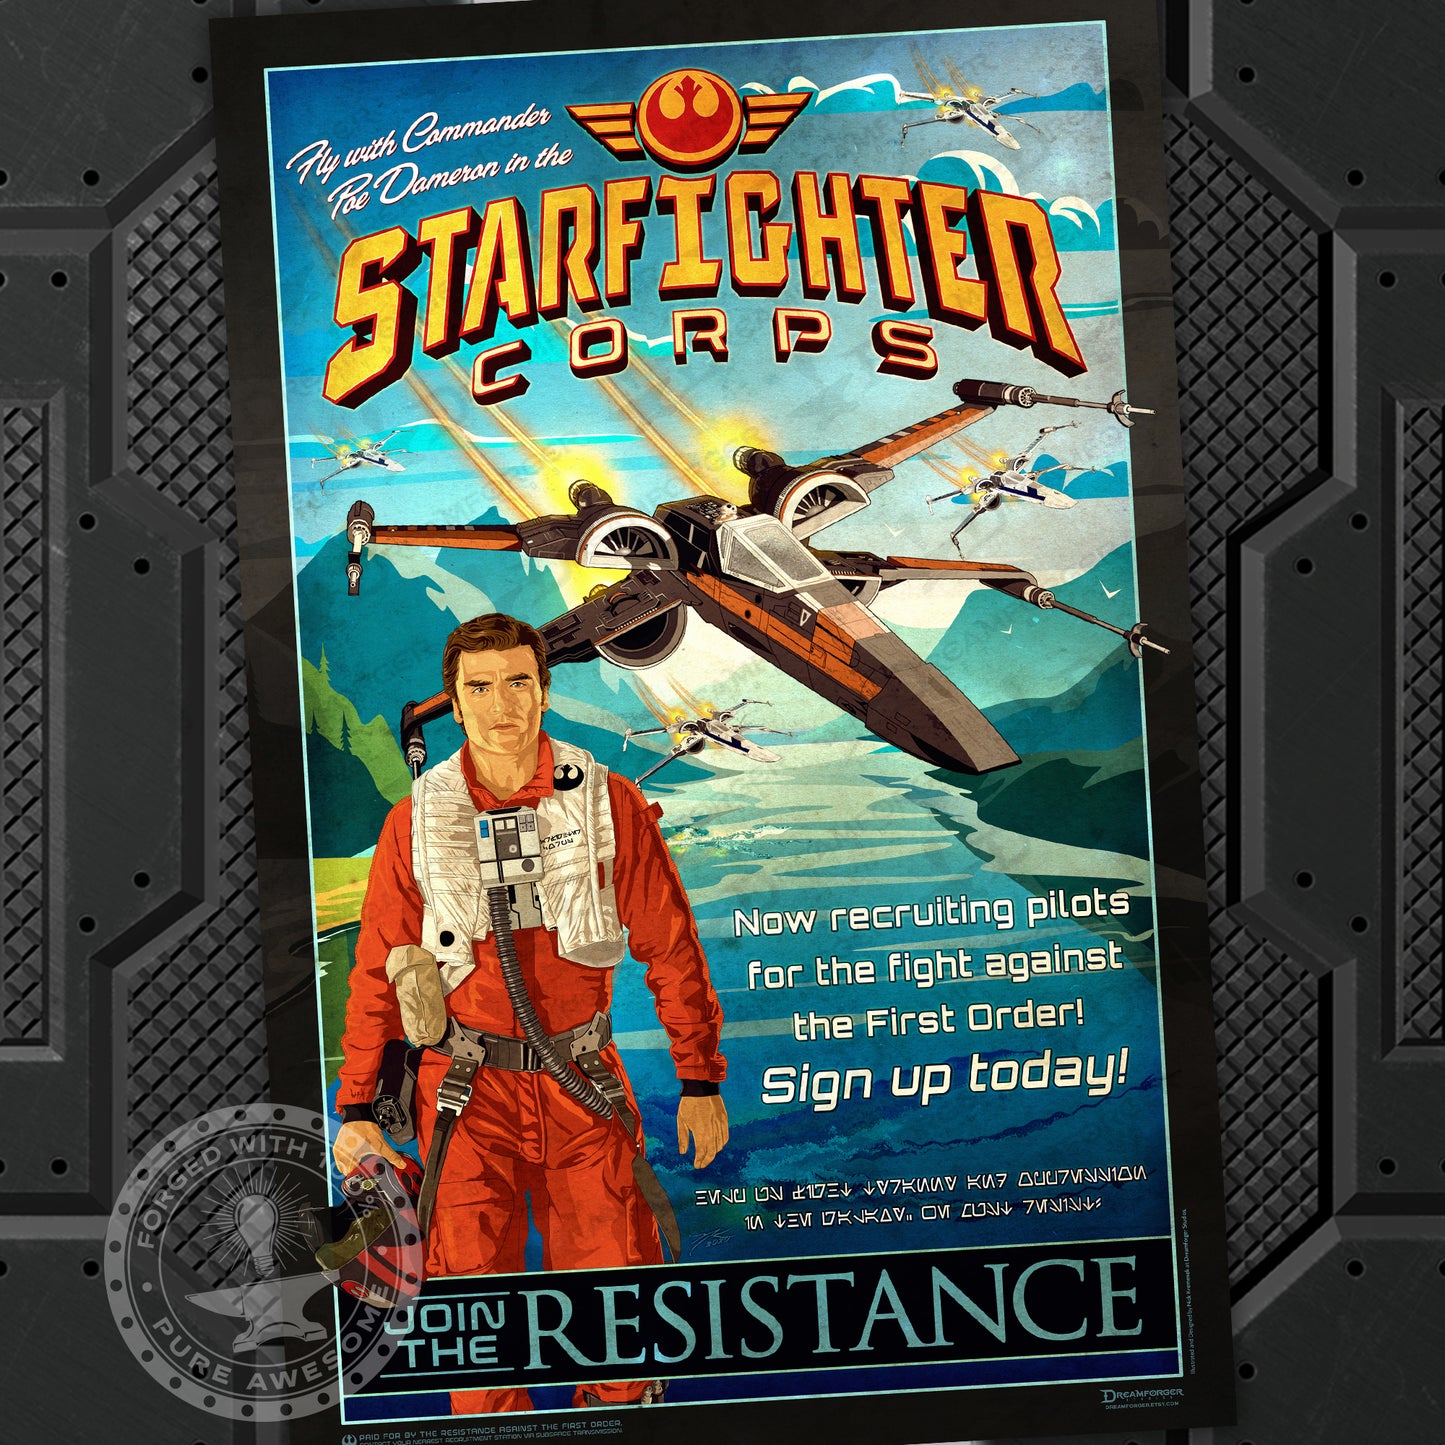 "Starfighter Corps (Join the Resistance)" Recruitment Poster